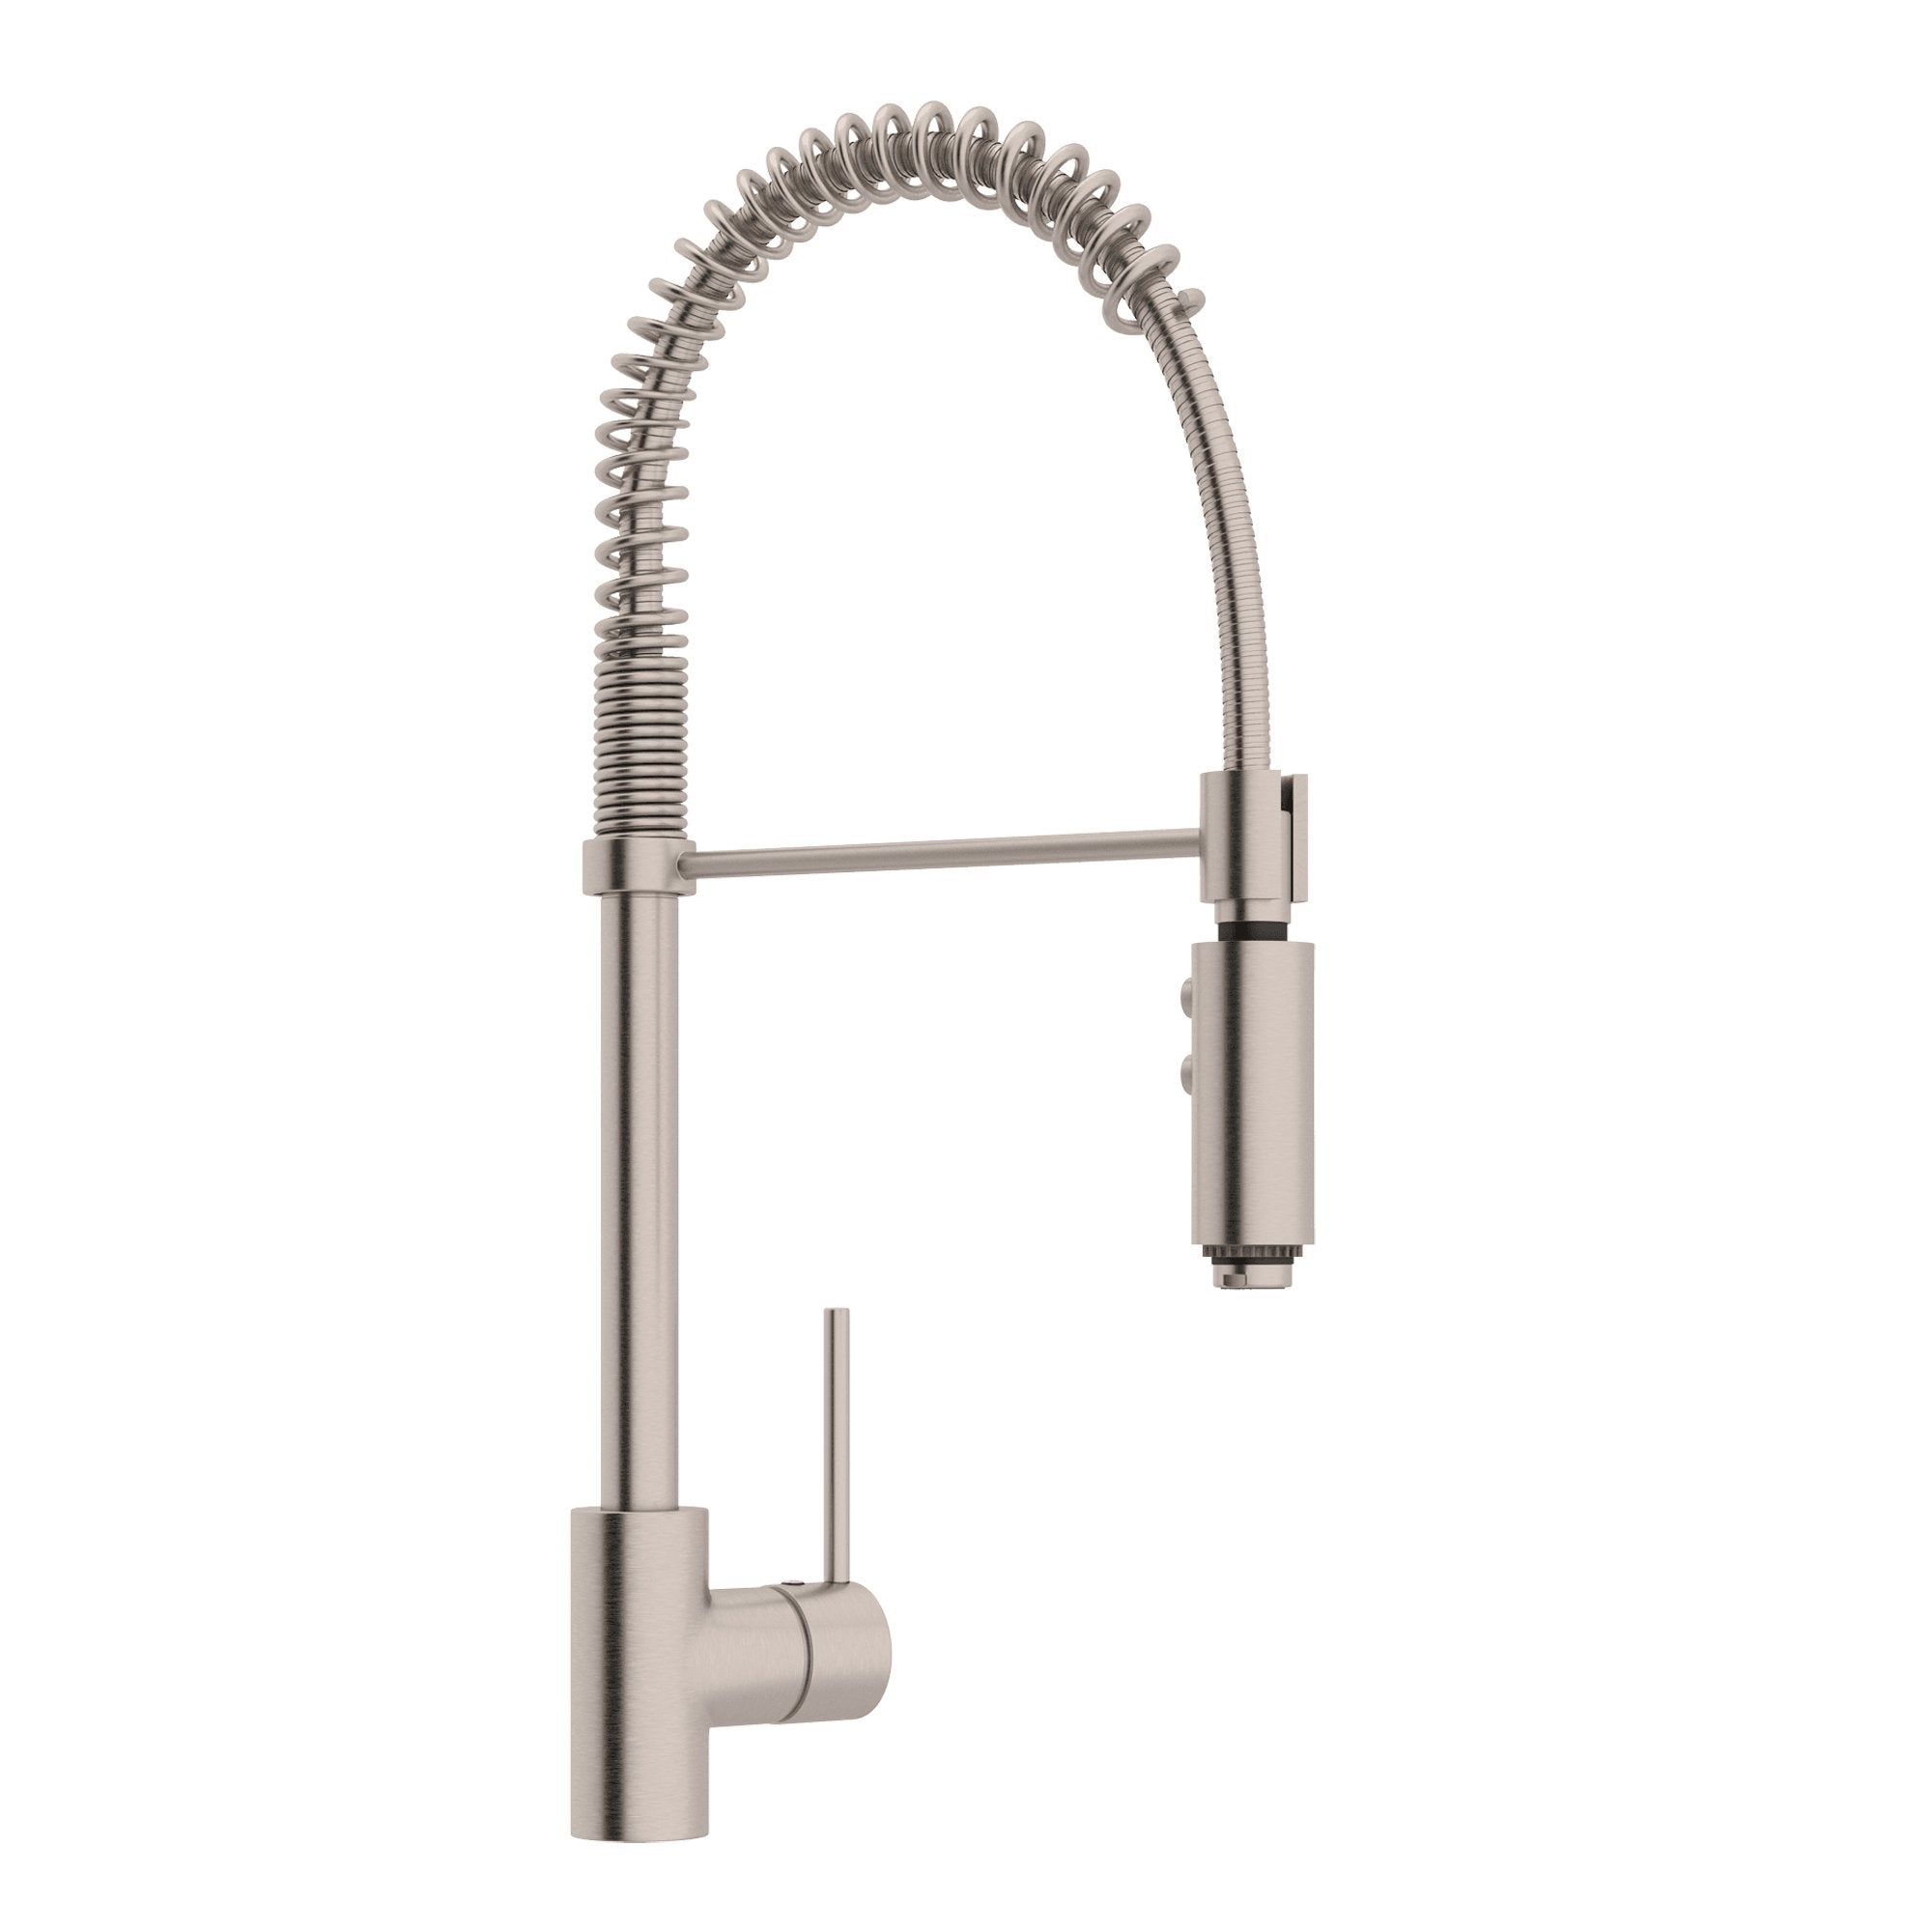 ROHL LS64 Pirellone Tall Pull-Down Kitchen Faucet